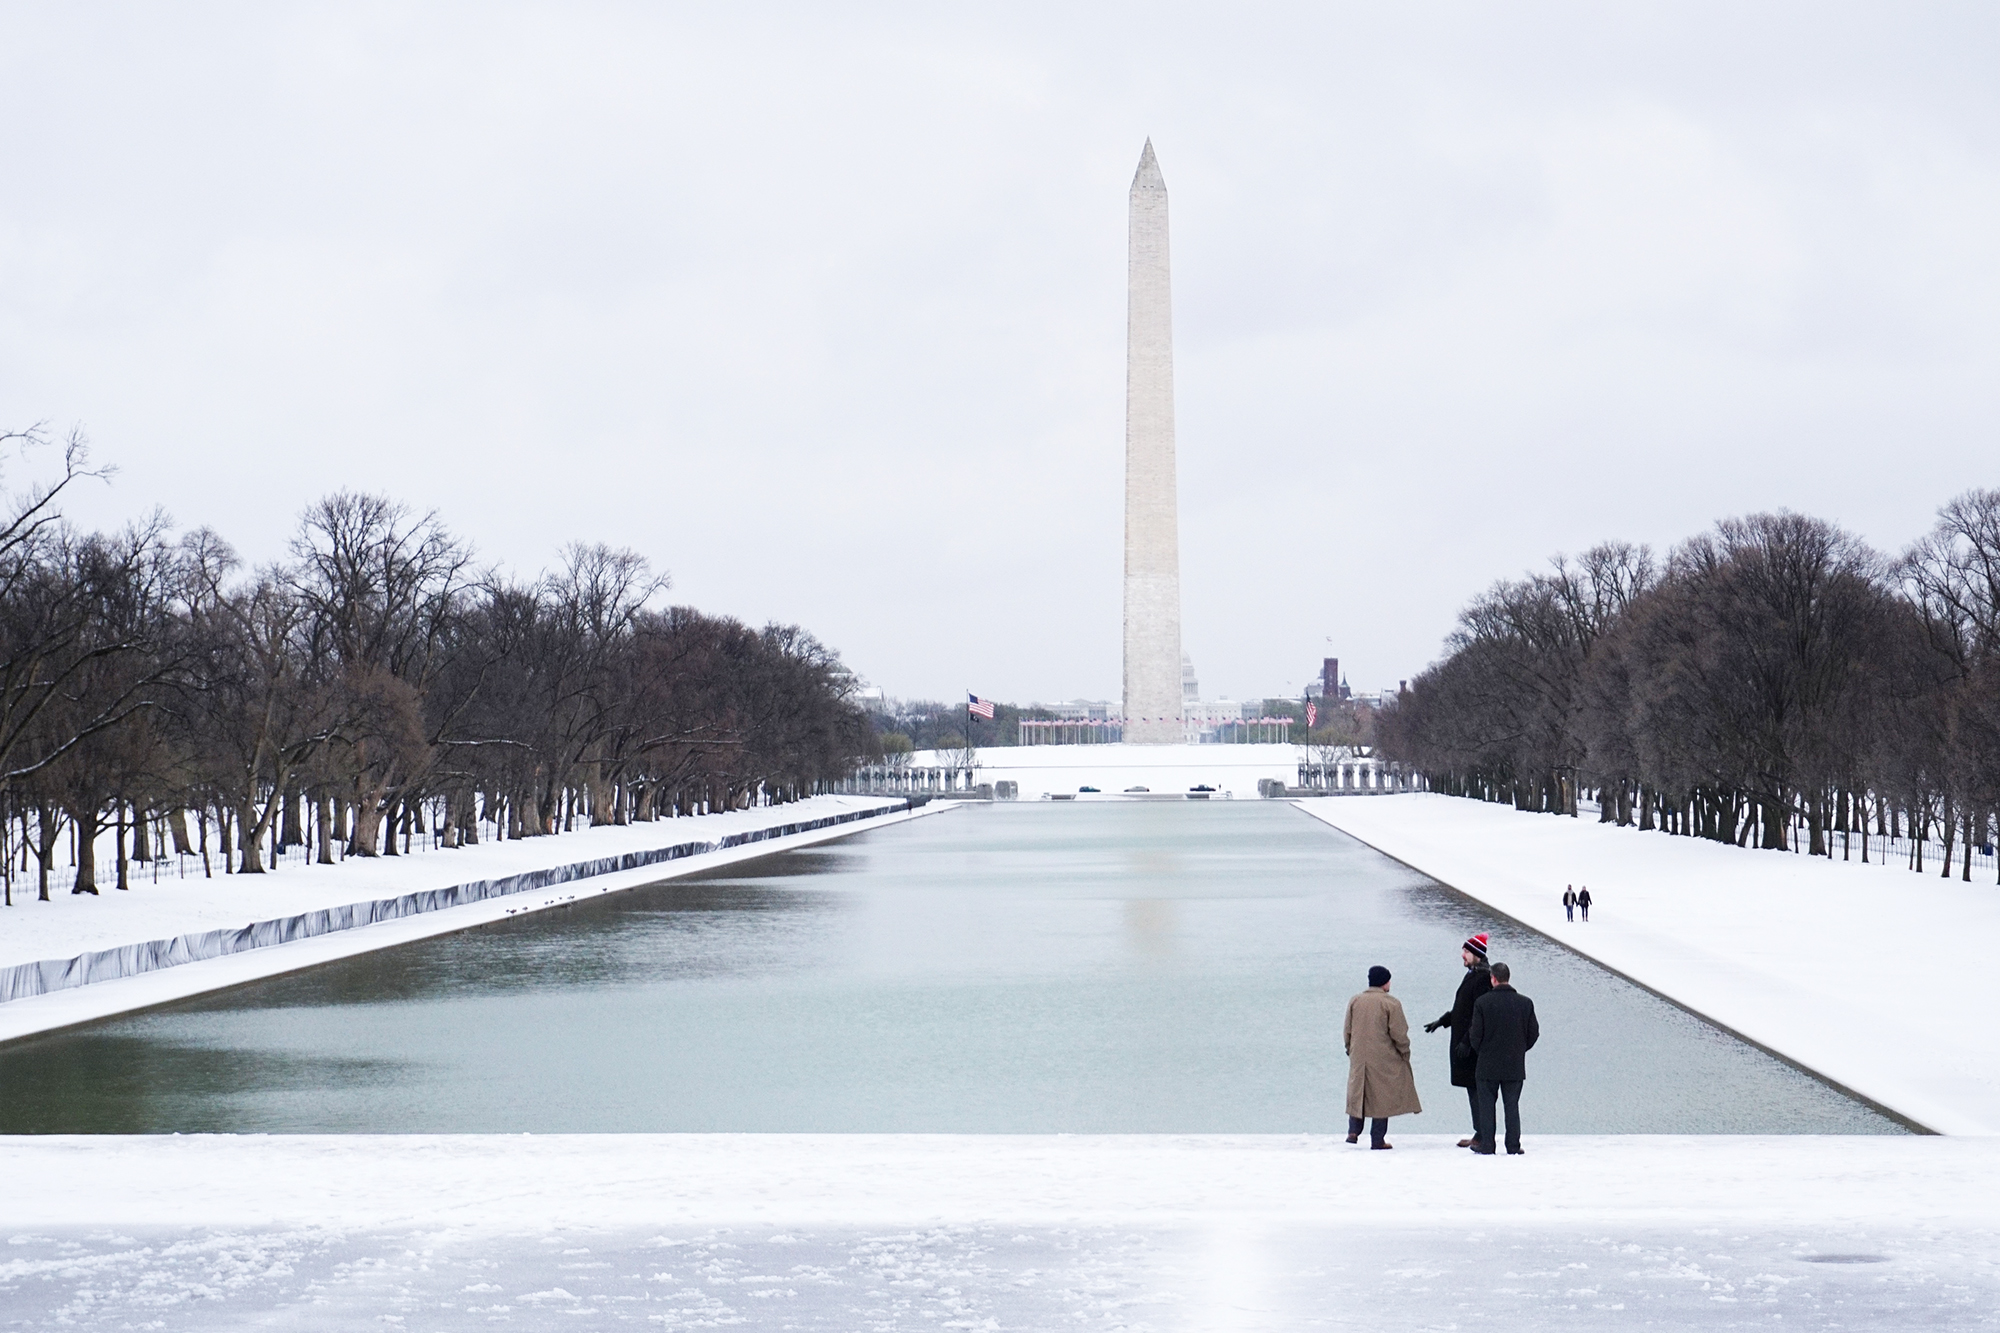 The Washington Monument is seen behind the snow-covered Mall in Washington, D.C., on March 14, 2017.